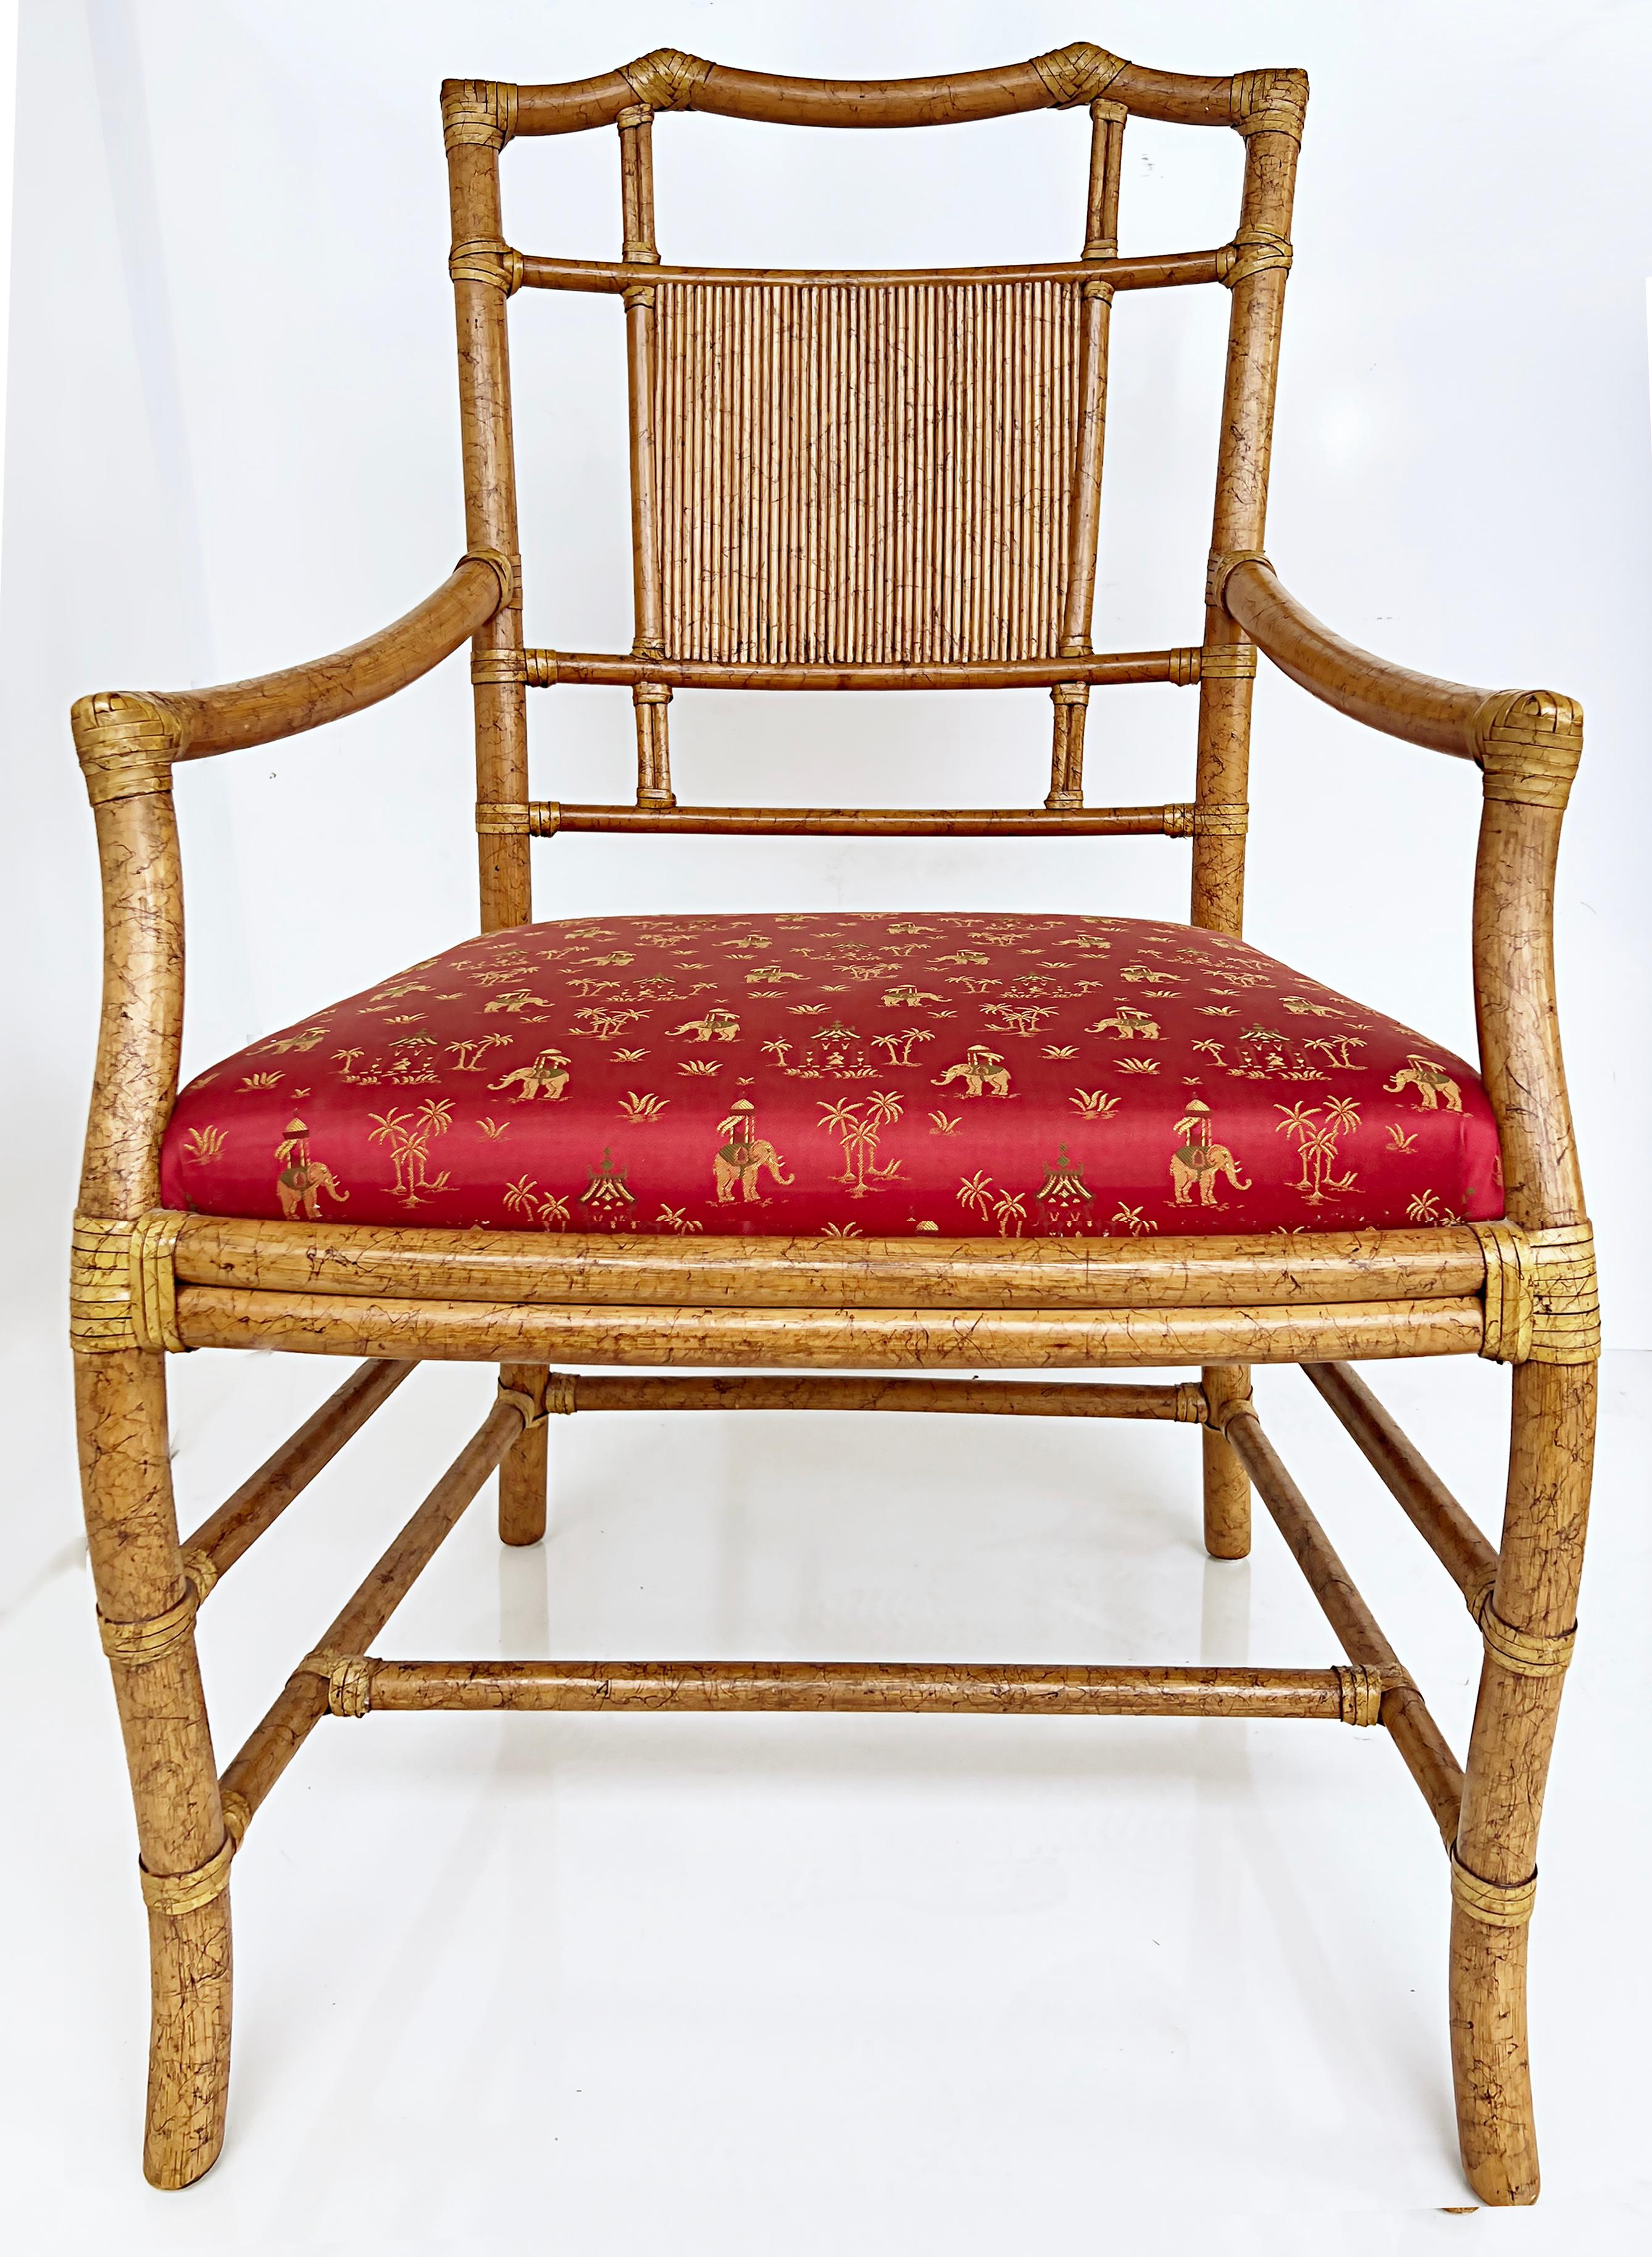 Offered for sale is a set of 6 vintage Chinoiserie rattan dining chairs by Ficks Reed. The set includes 2 armchairs and 4 side chairs. The chairs are in extremely good condition and have a faux-tortoise finish with rawhide leather wrapping accents.